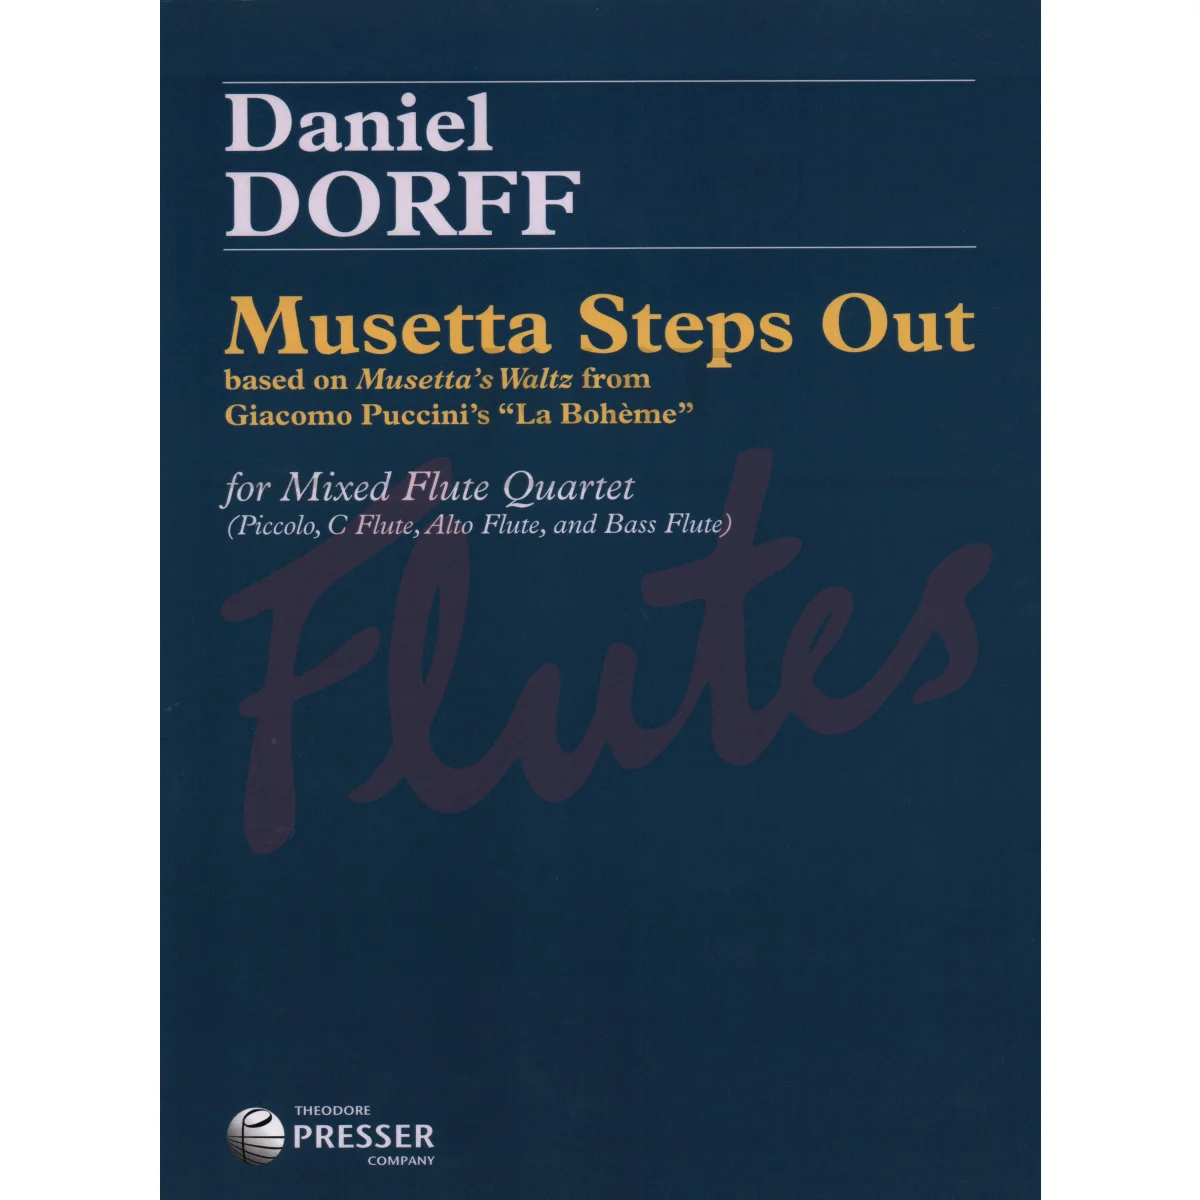 Musetta Steps Out for Mixed Flute Quartet